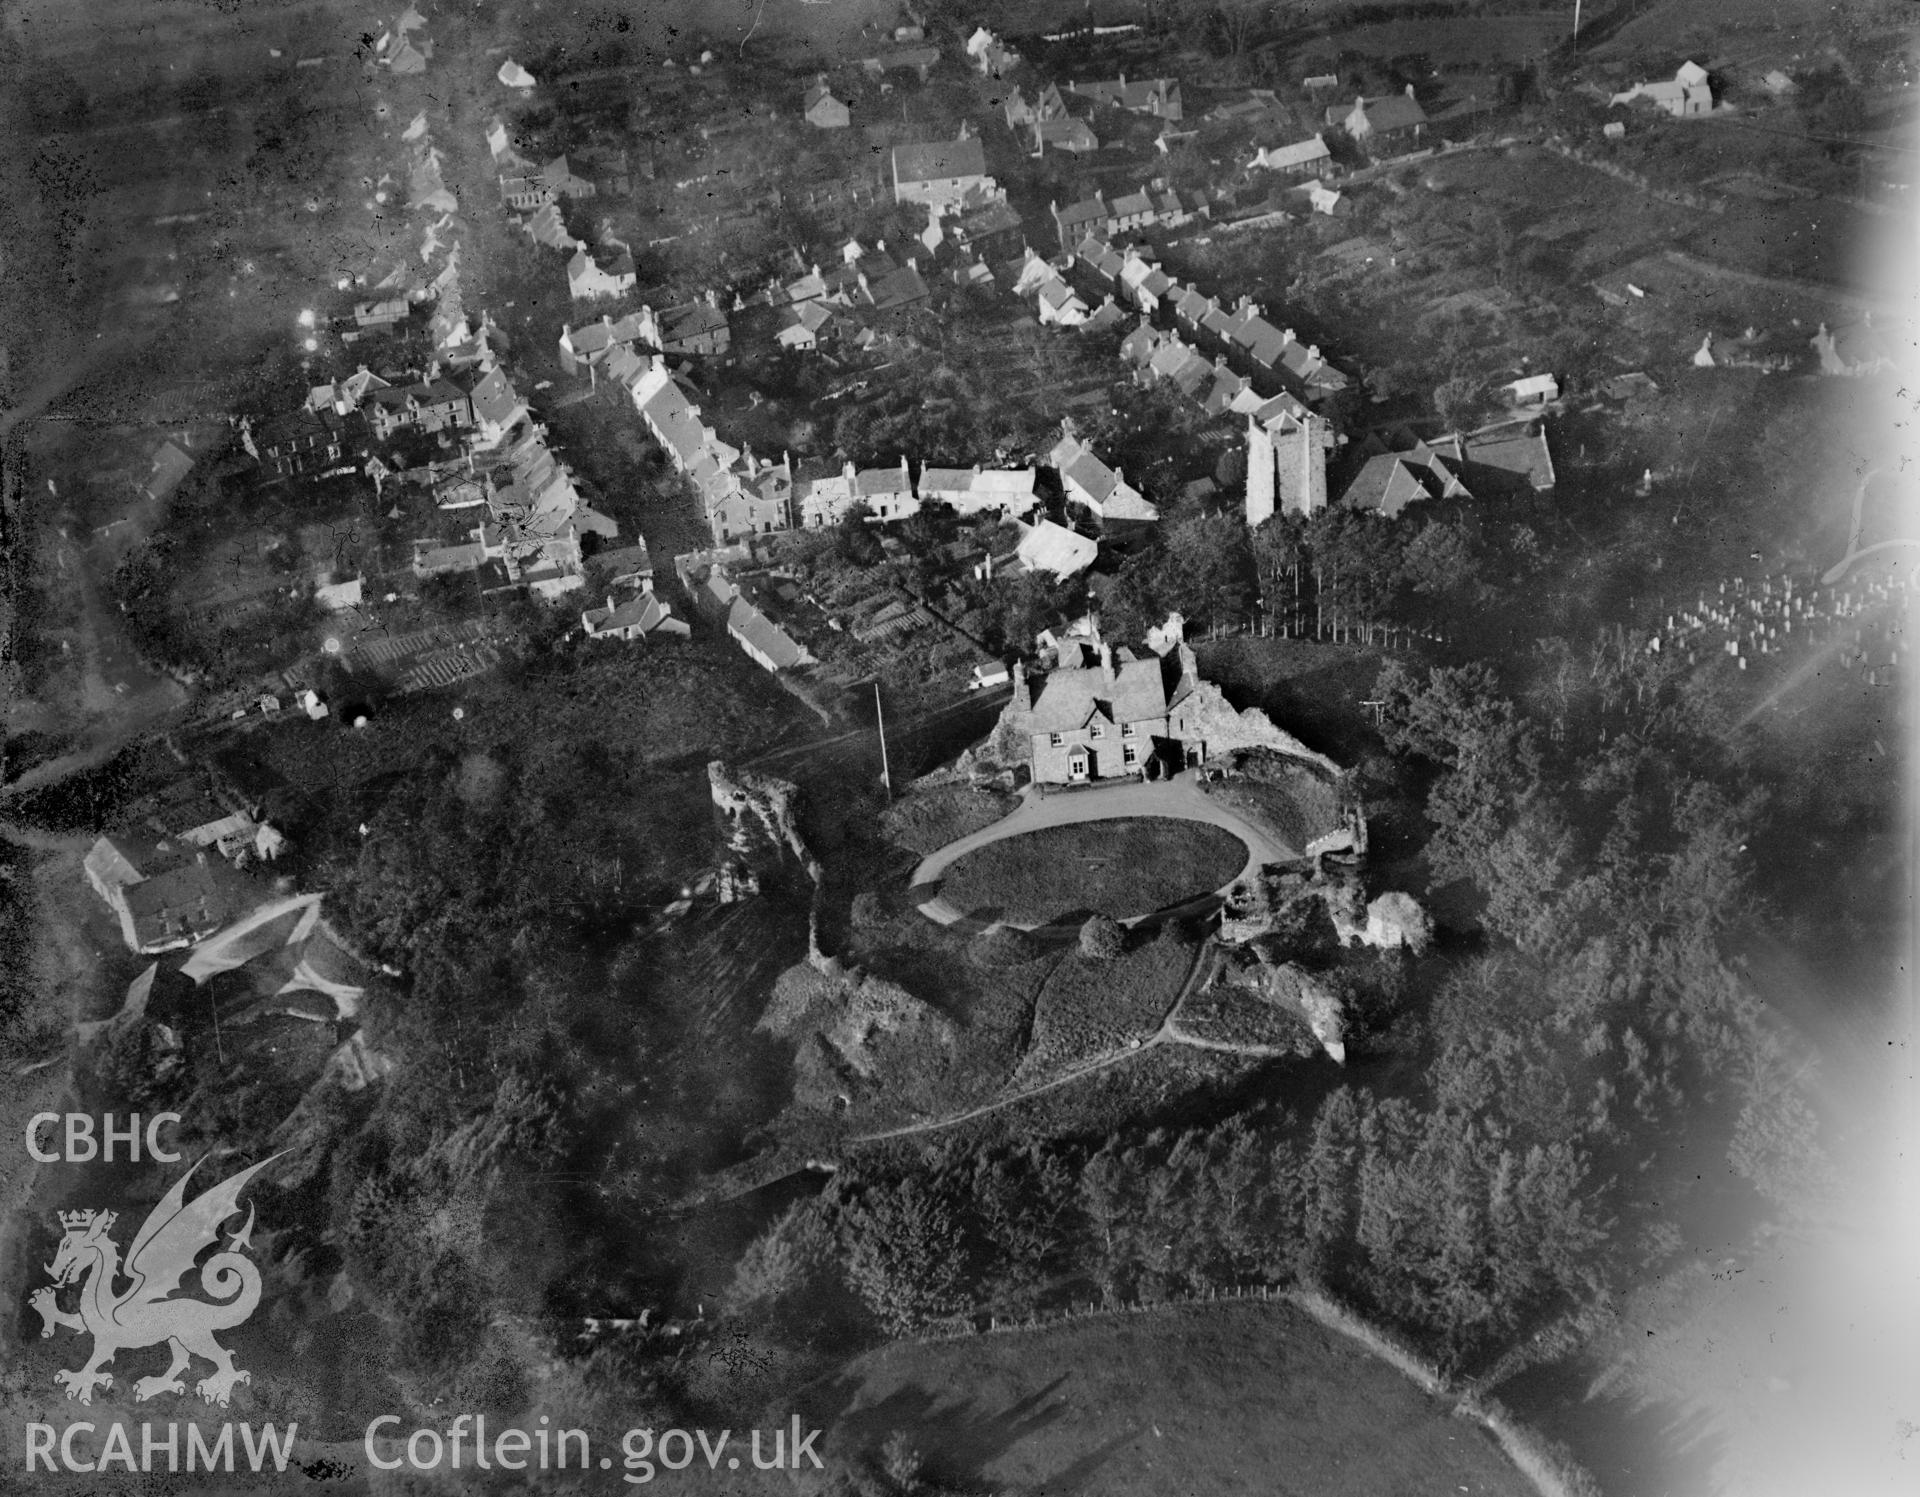 View of Newport, Pembrokeshire, showing castle, oblique aerial view. 5?x4? black and white glass plate negative.